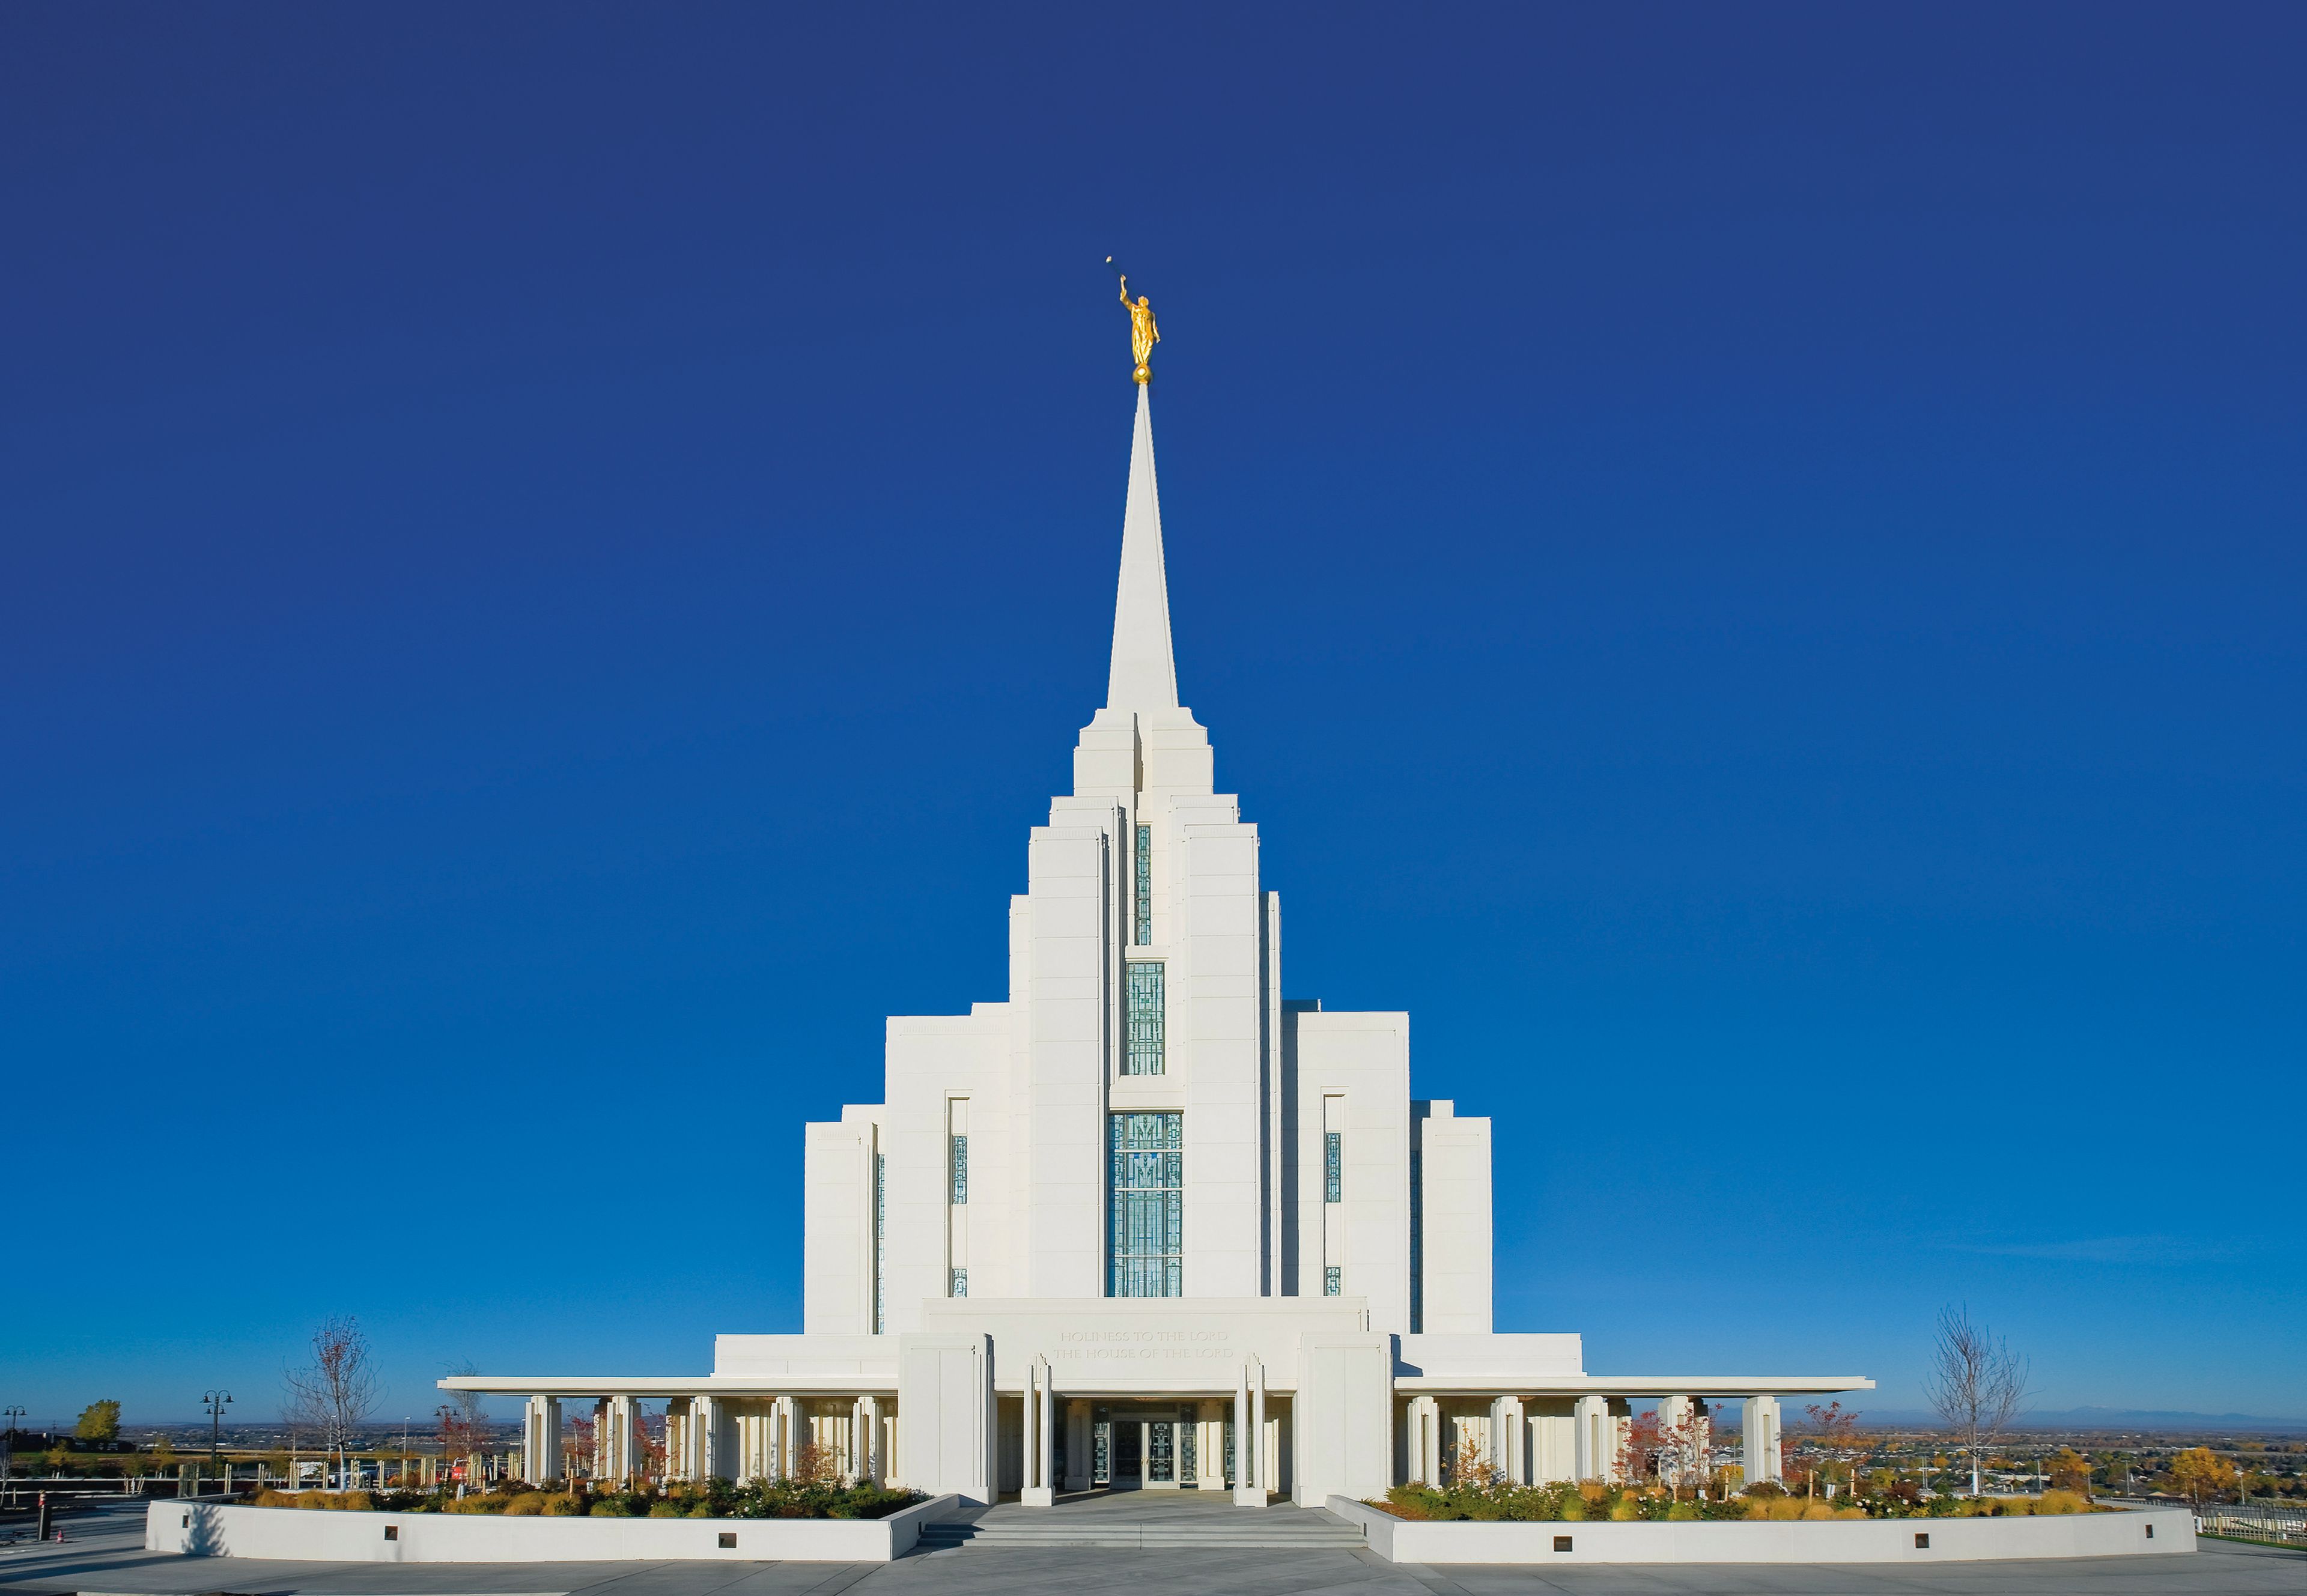 The entire Rexburg Idaho Temple, including the entrance and scenery.